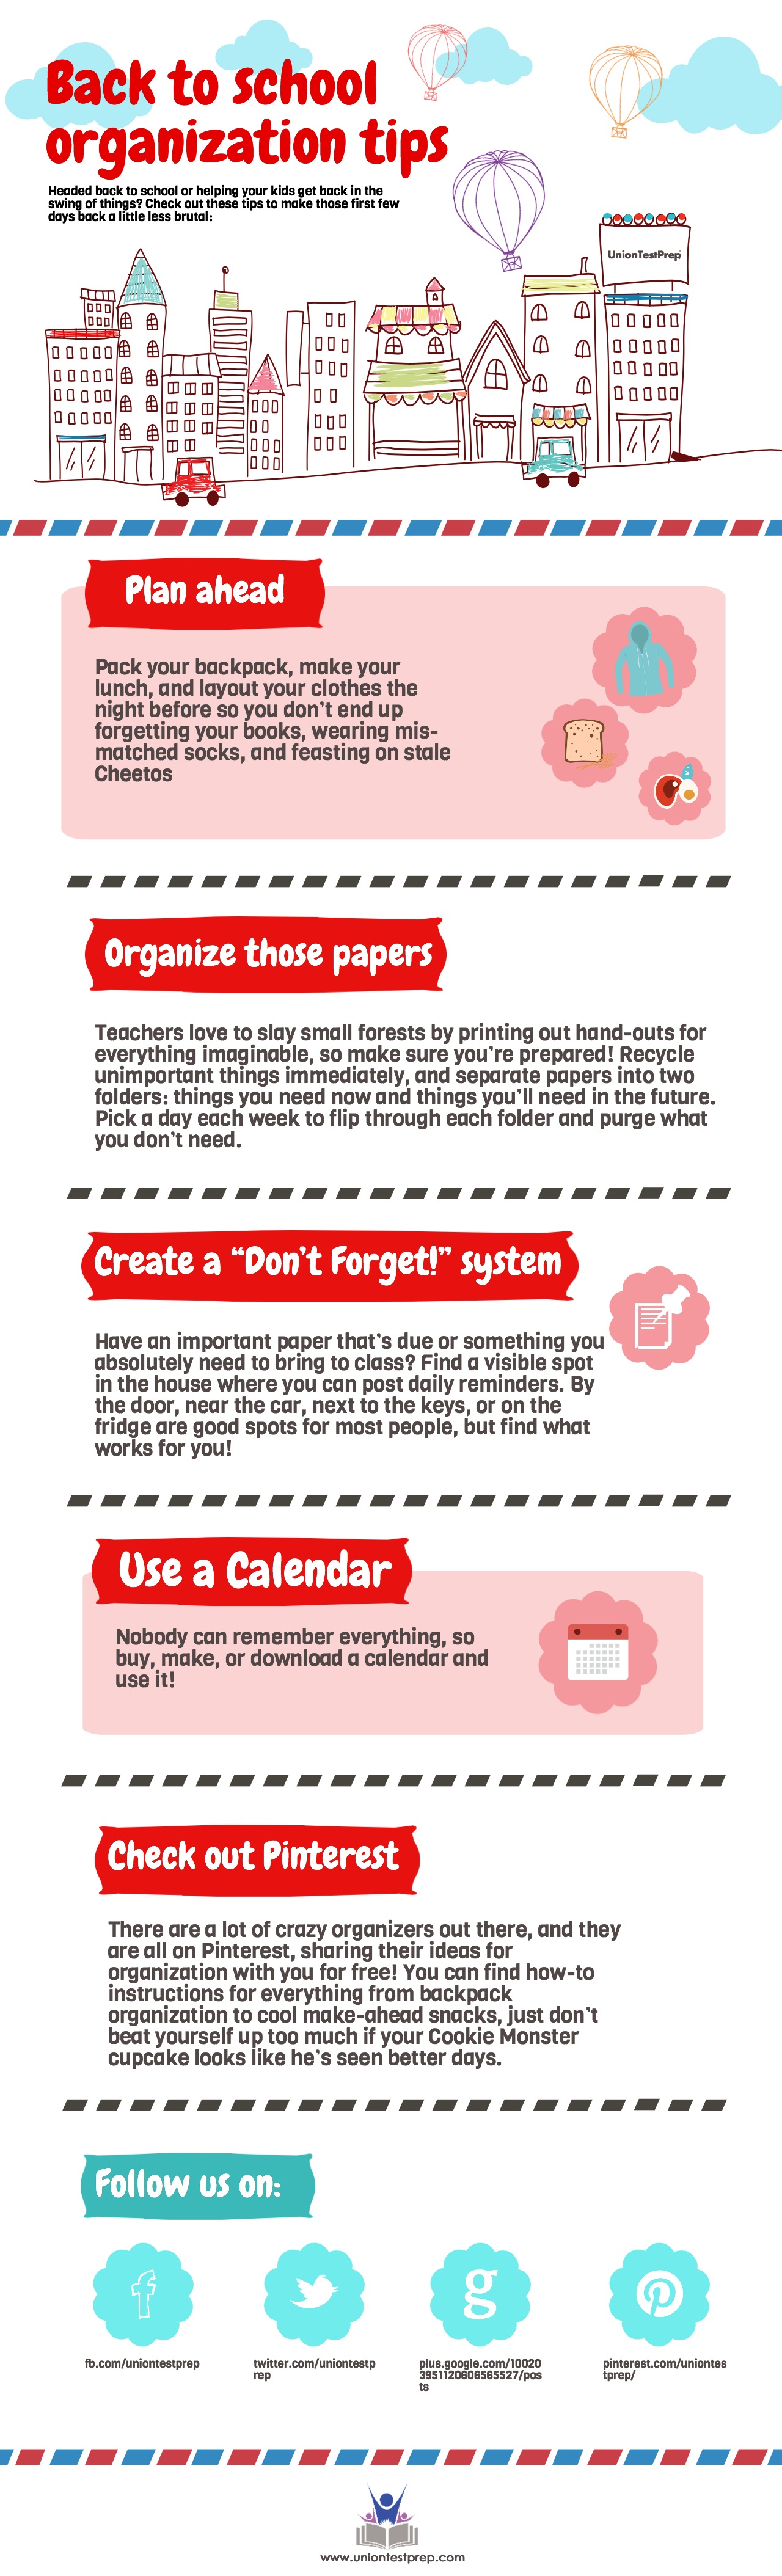 Ways to get organized for back-to-school